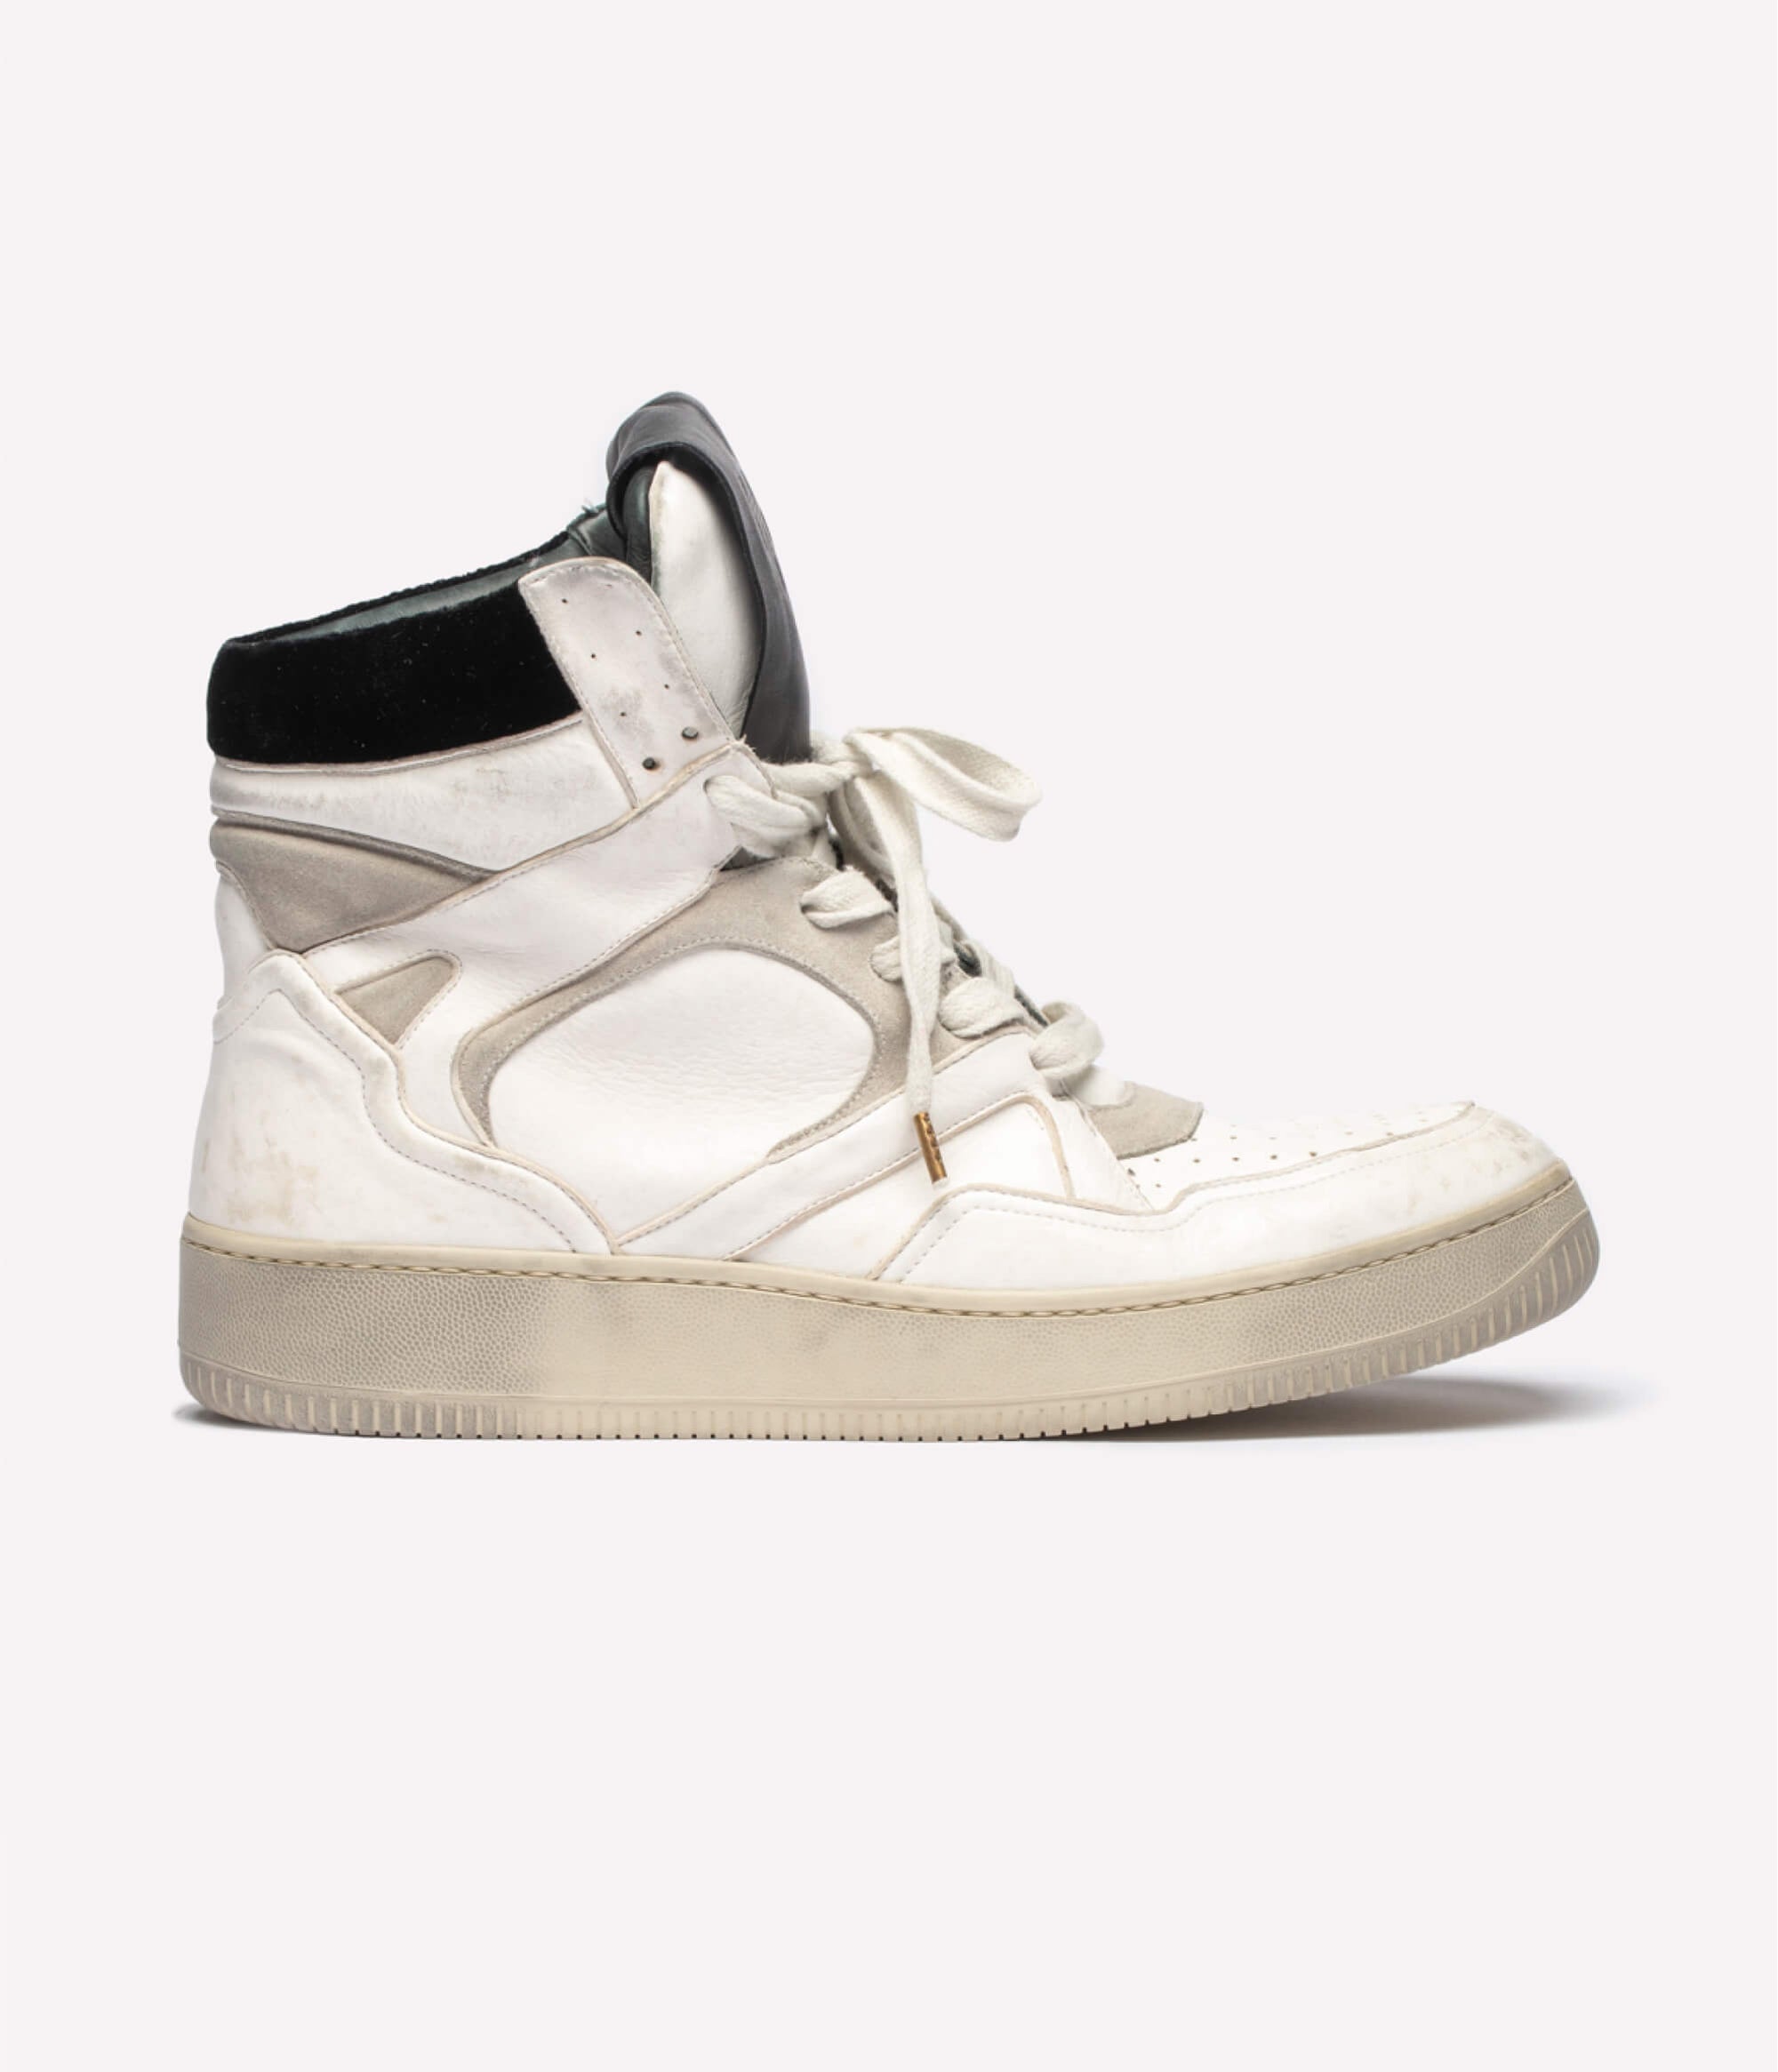 HUMAN RECREATIONAL SERVICES MONGOOSE SHOE IN DISTRESSED WHITE MADE WITH ITALIAN CALF SKIN